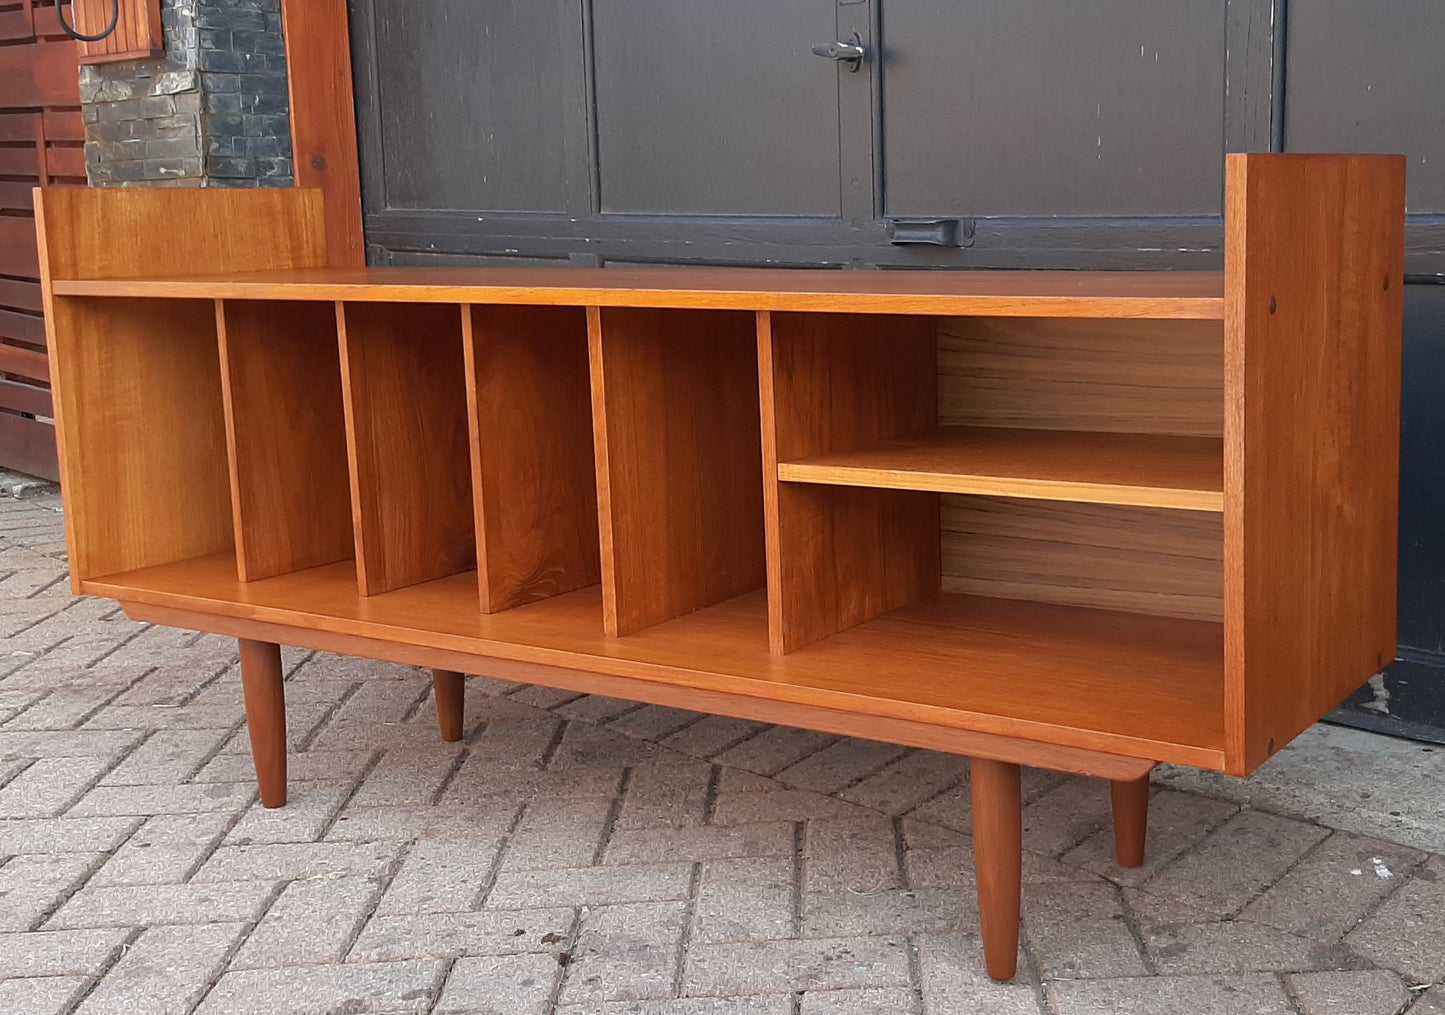 REFINISHED MCM Media Console, Perfect